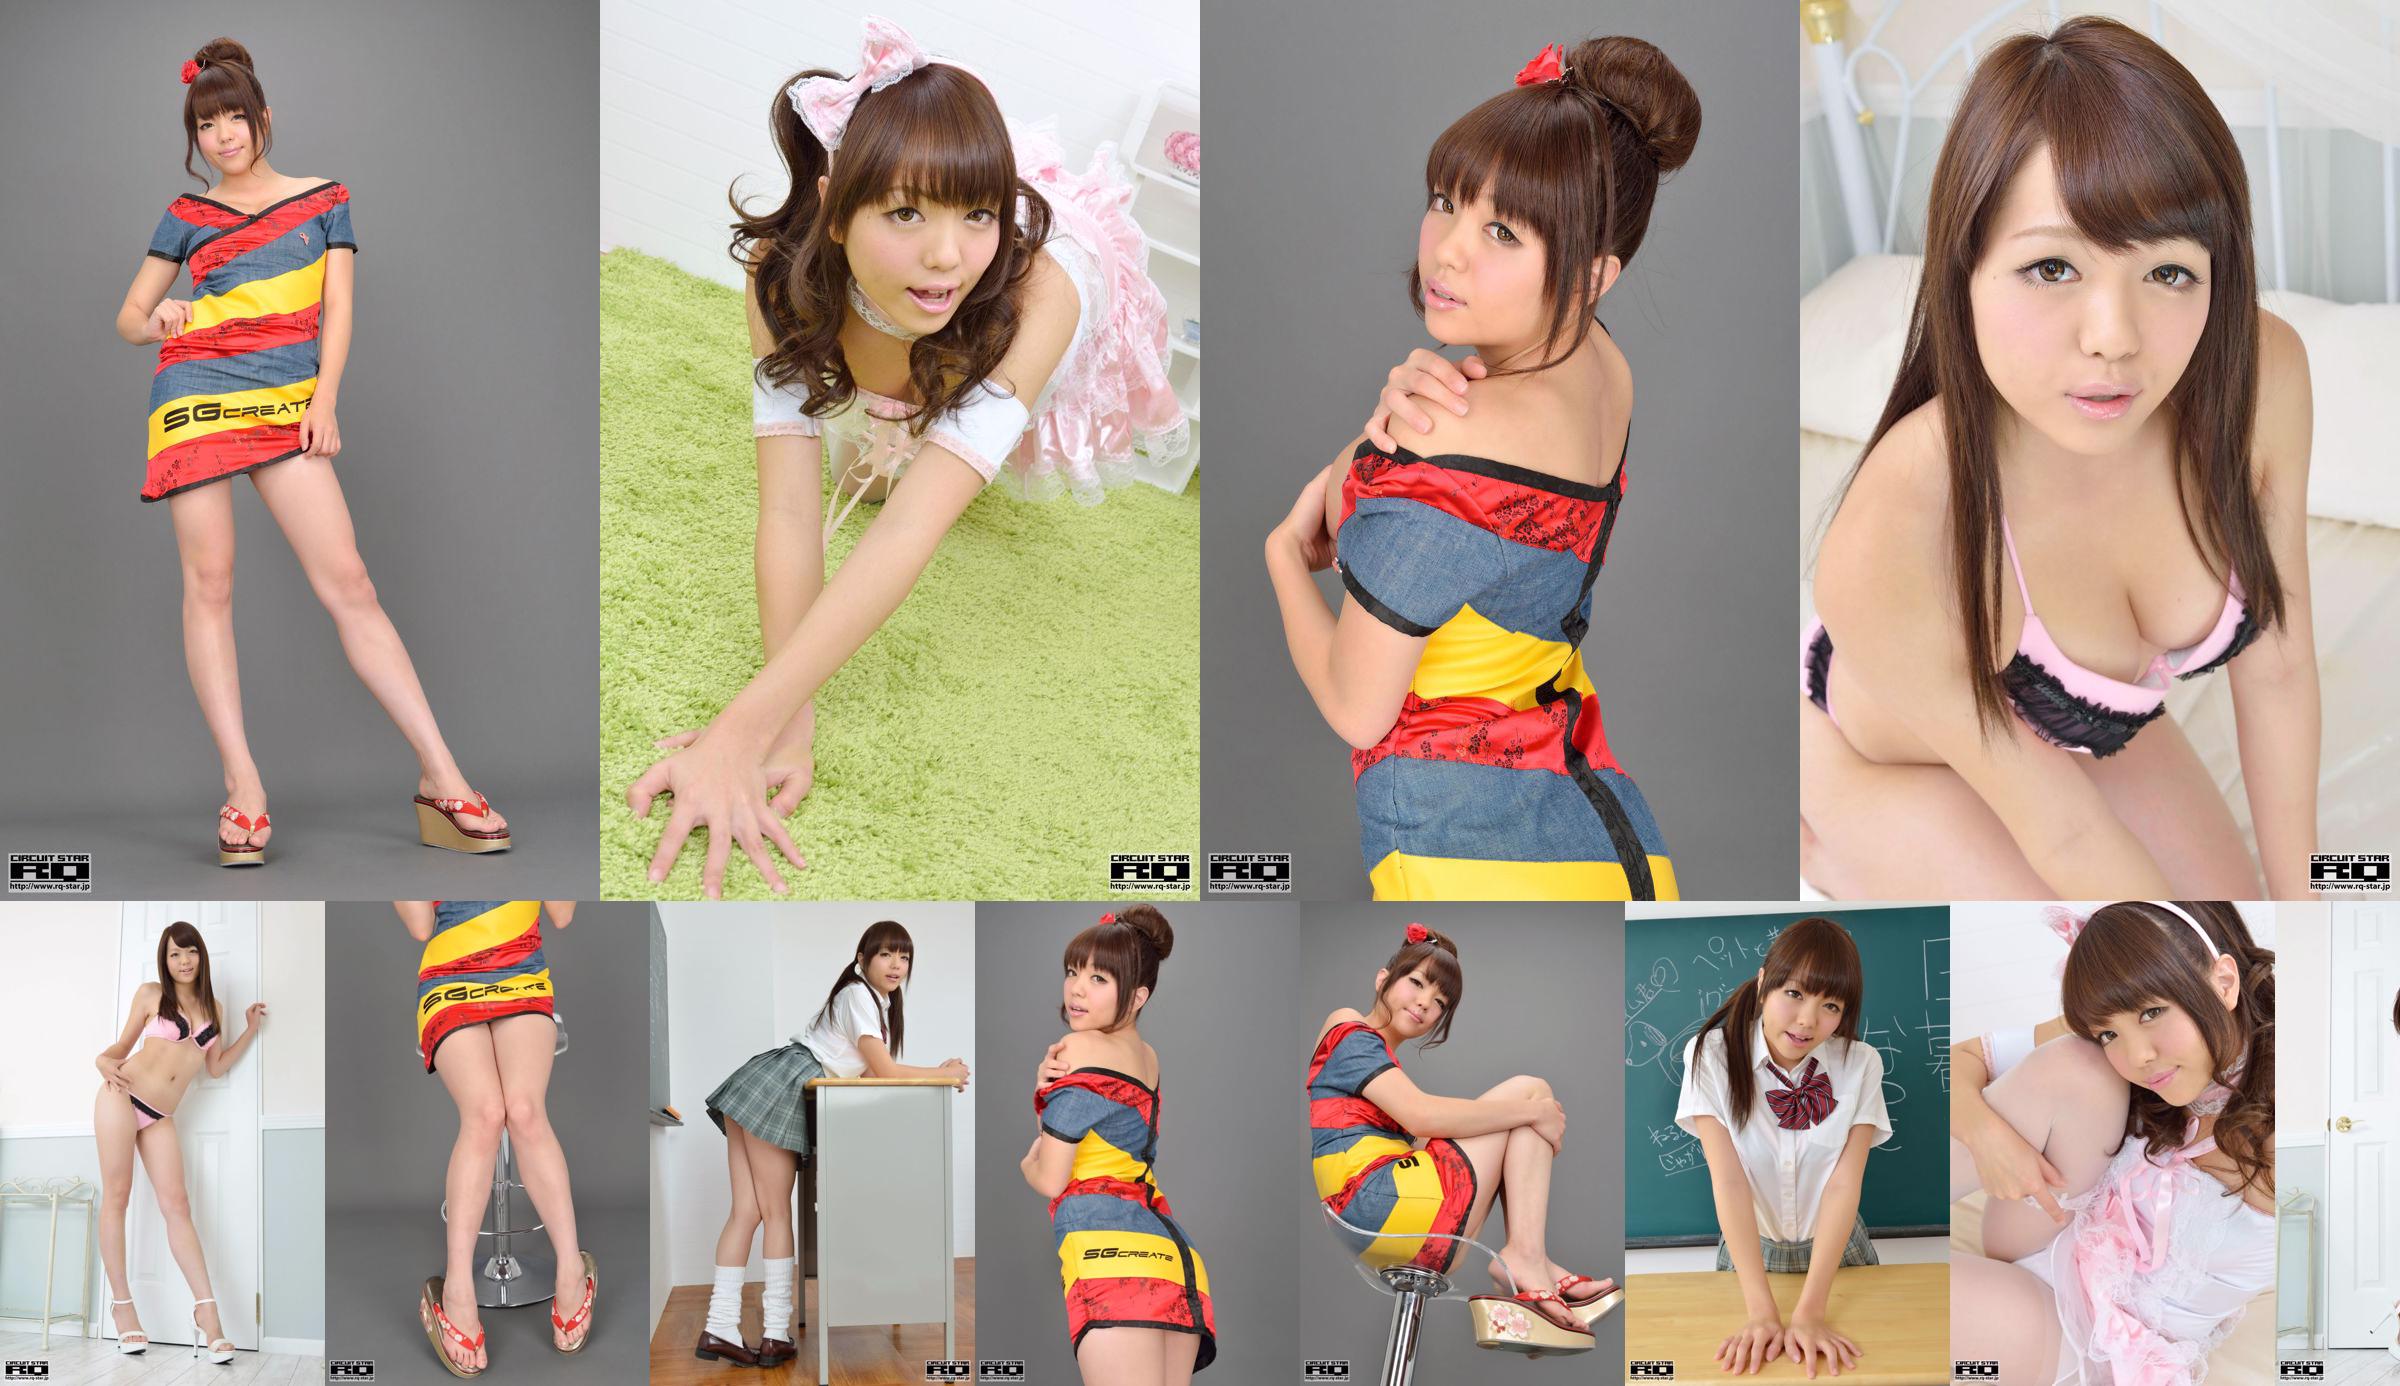 [RQ-STAR] NO.00736 日晚なつき Costume Play Lace Beautiful Girl Series No.13afbb หน้า 4